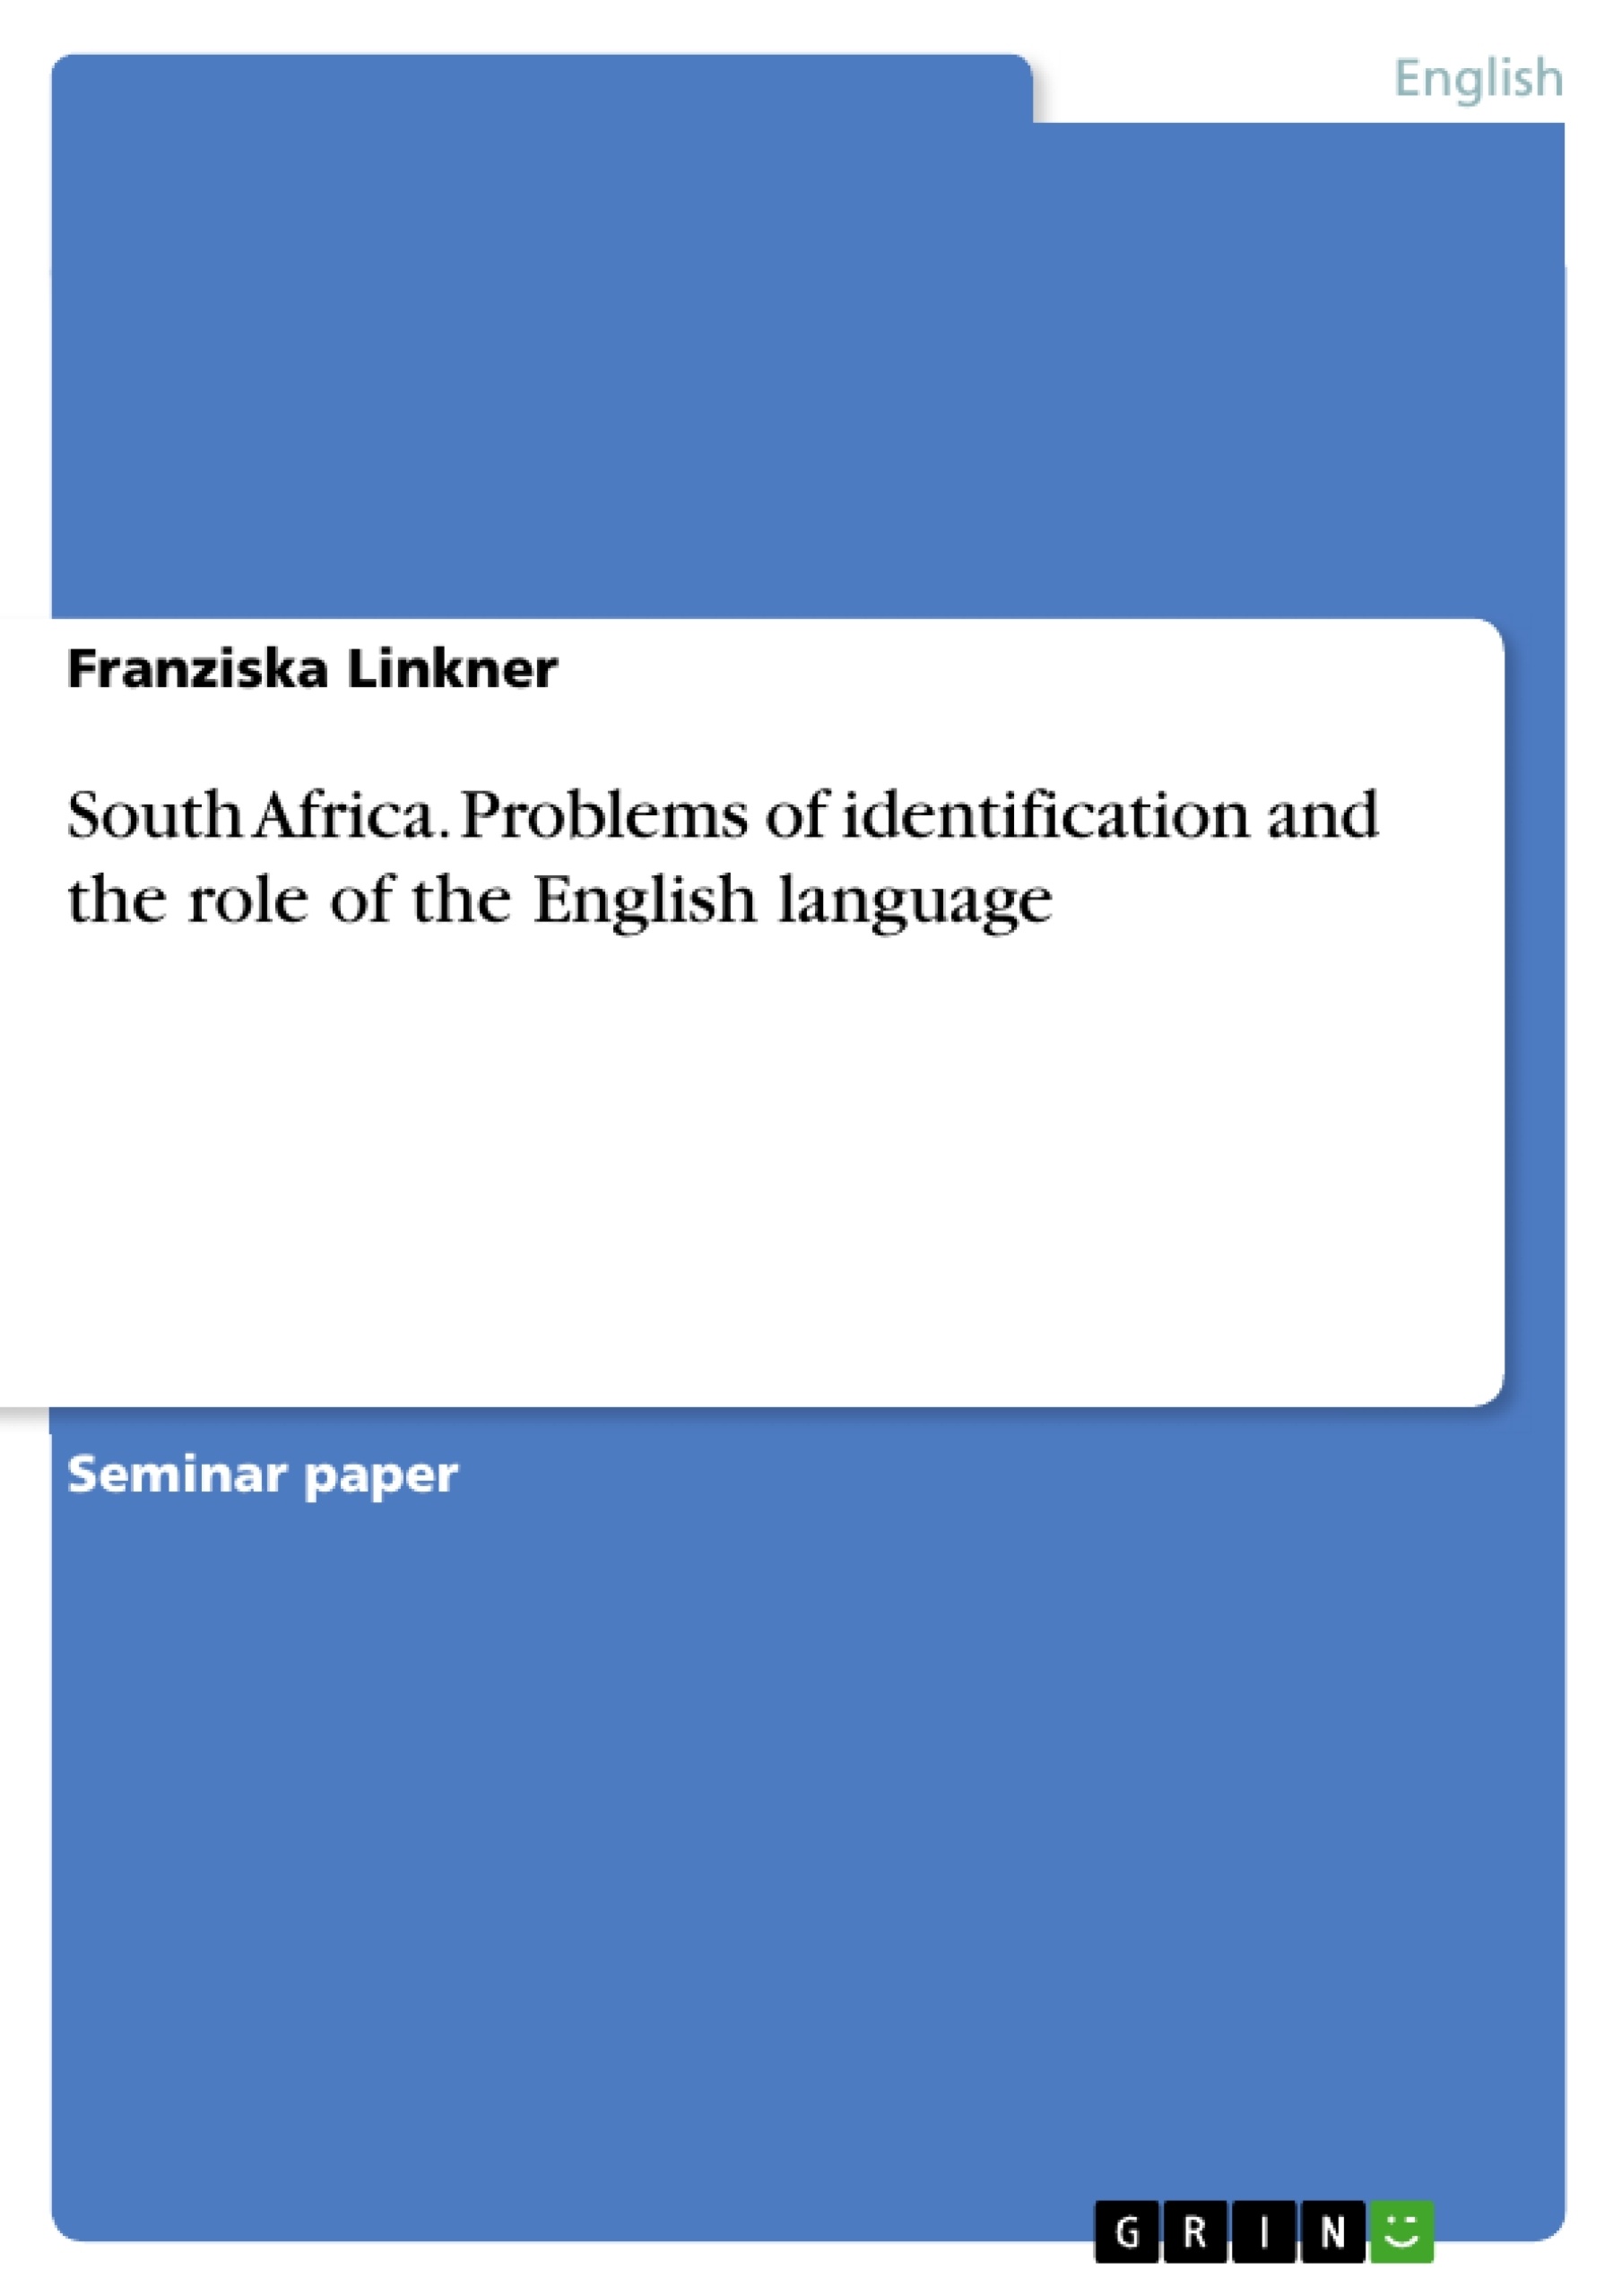 Title: South Africa. Problems of identification and the role of the English language